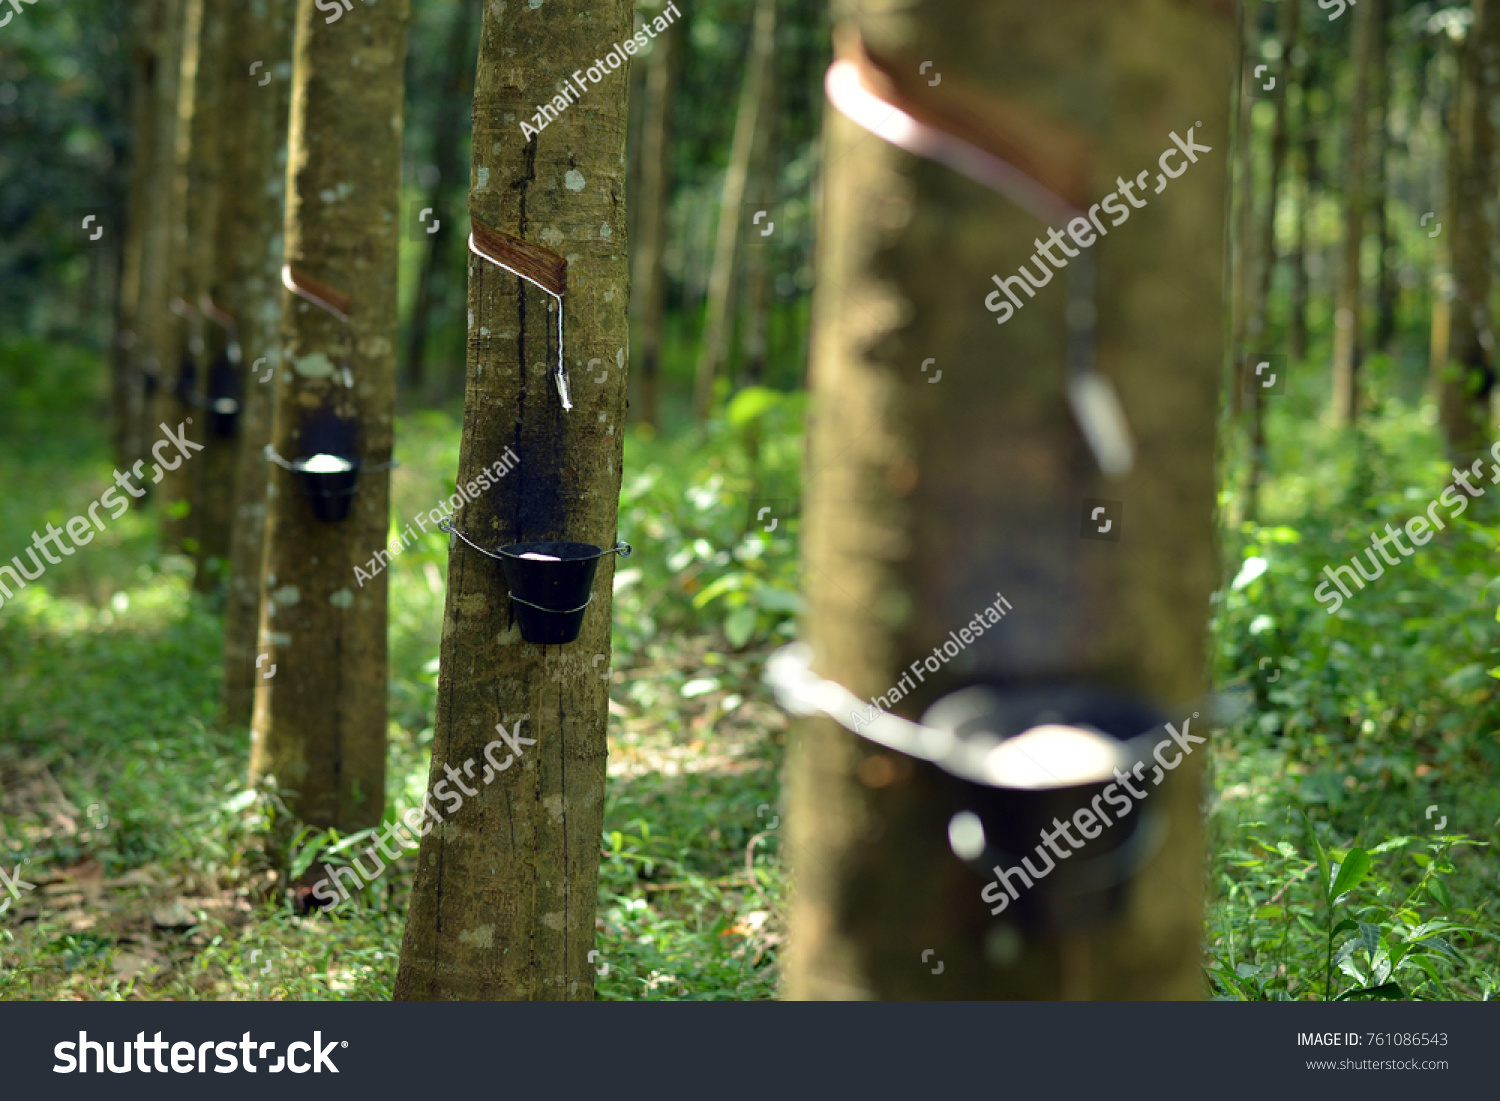 Rubber tree latex in asia #761086543